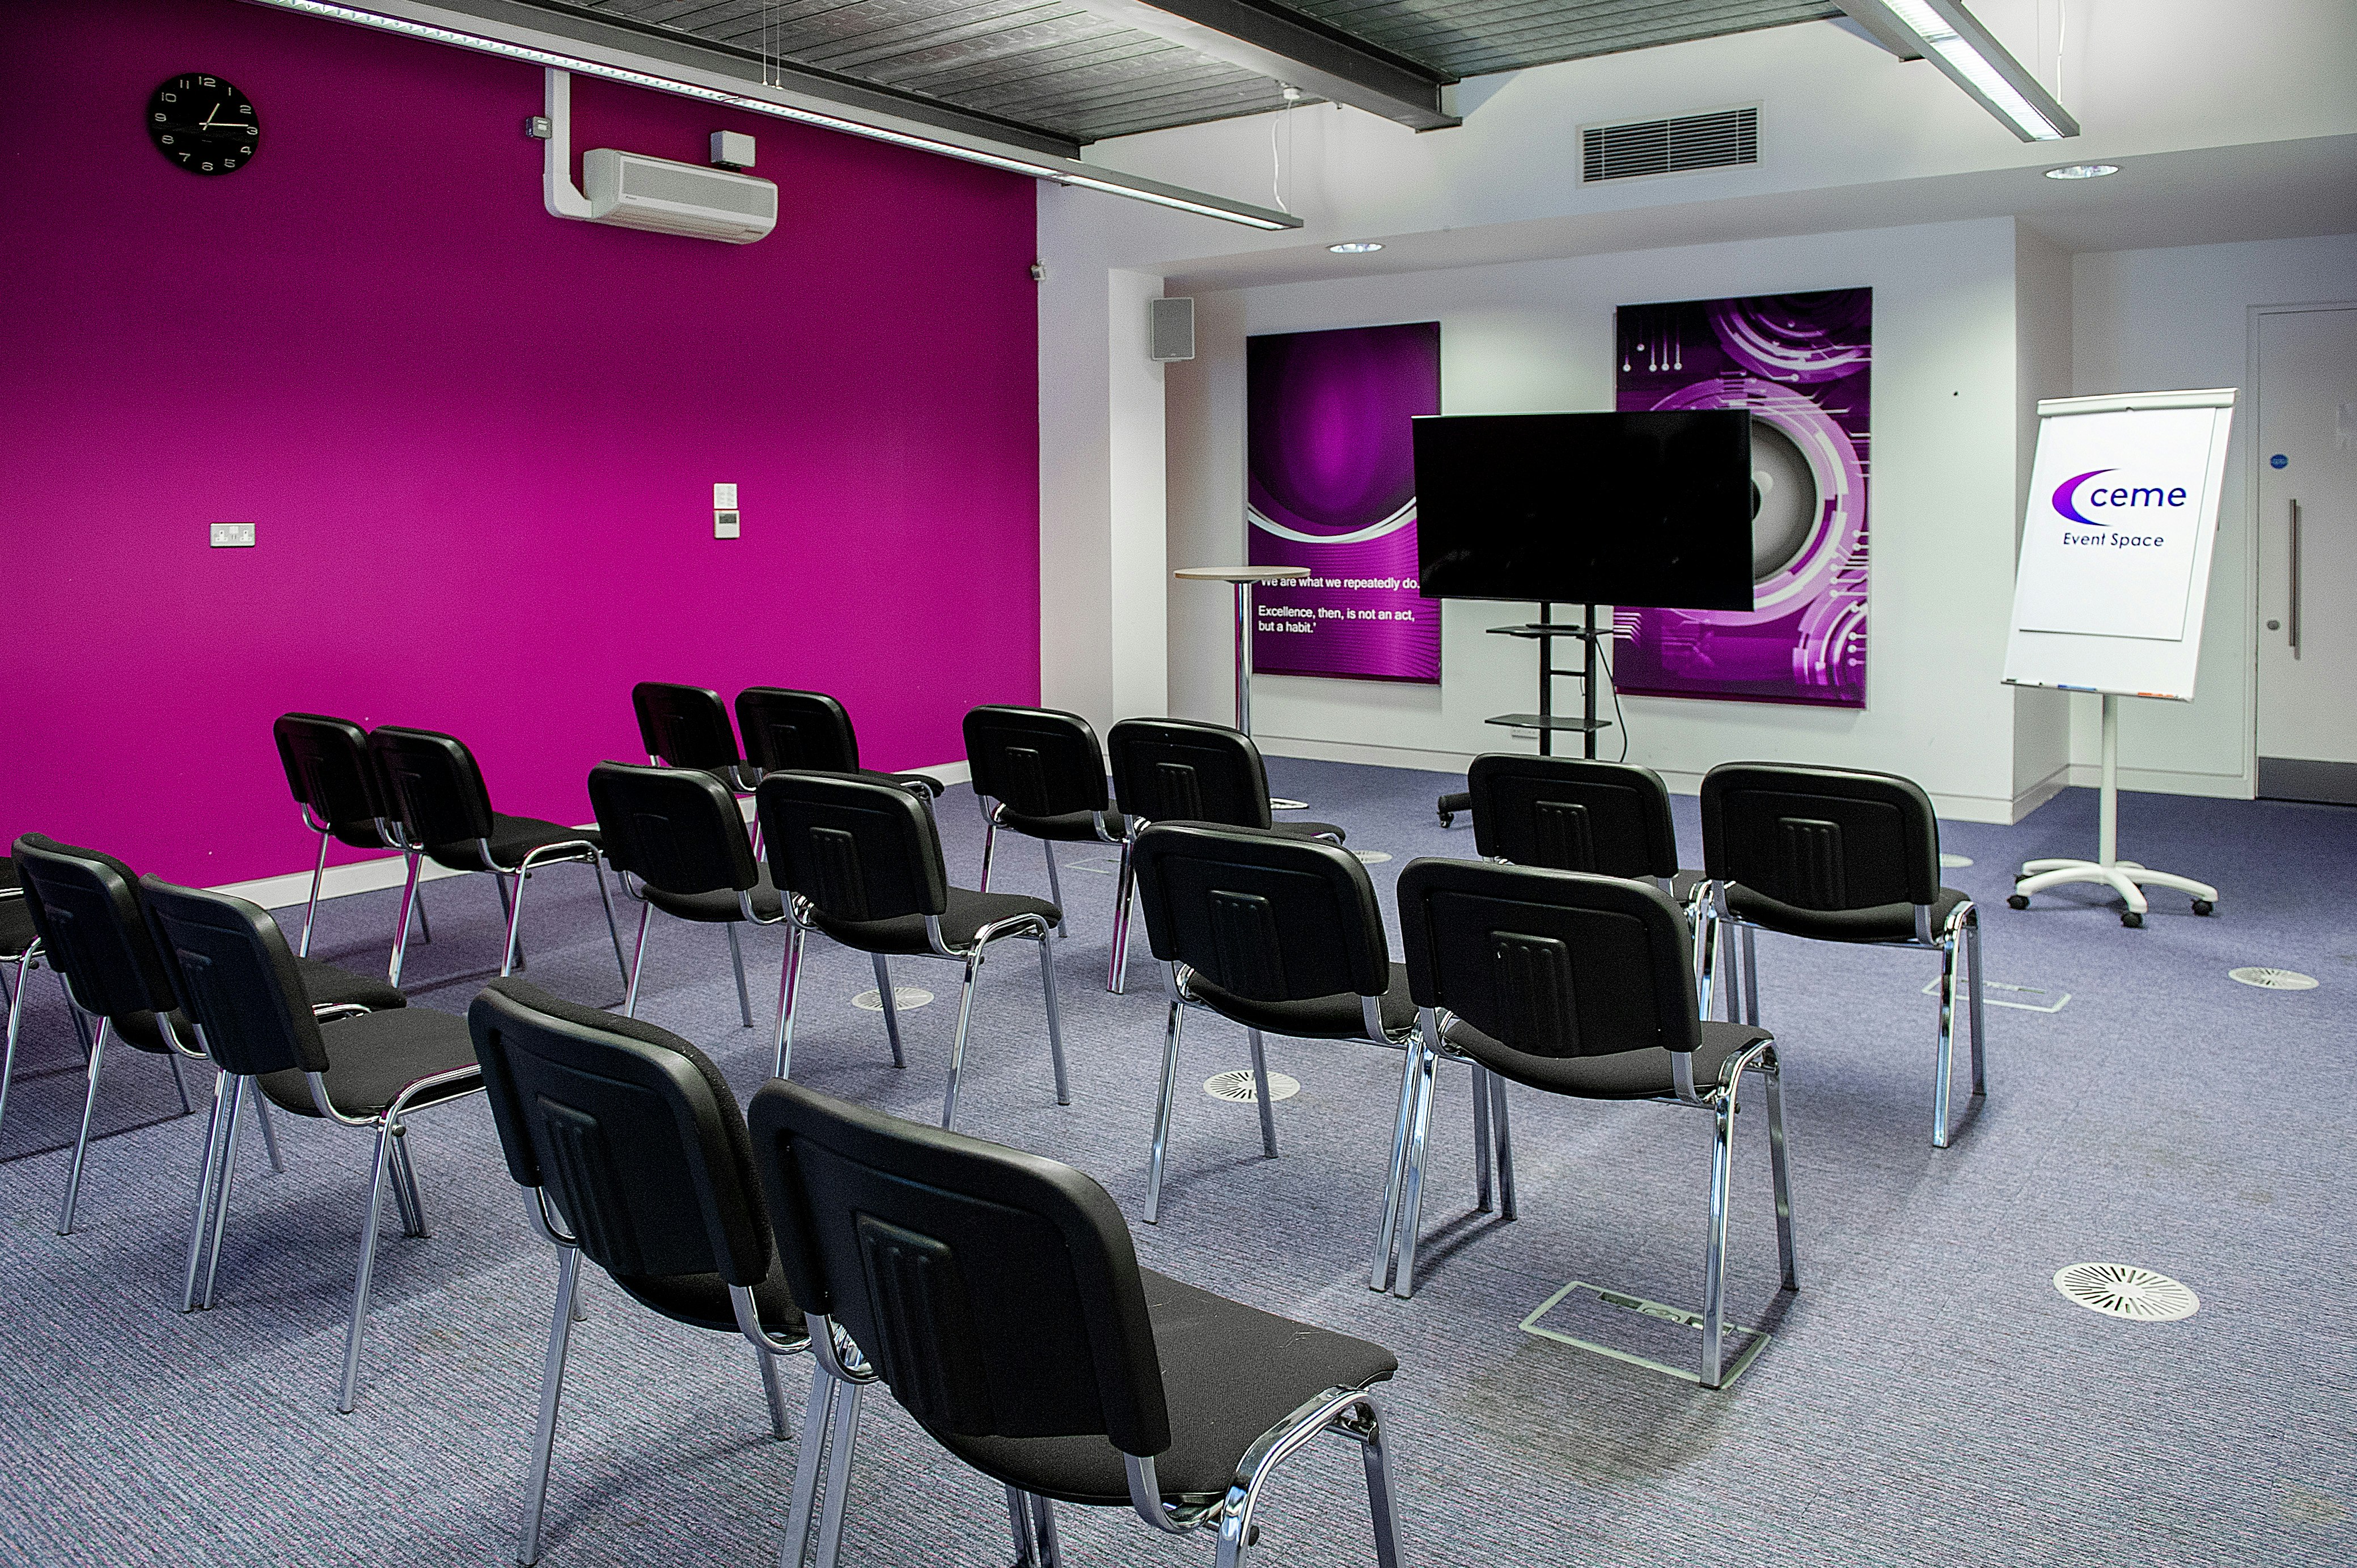 CEME Events Space - Large Meeting Room image 1